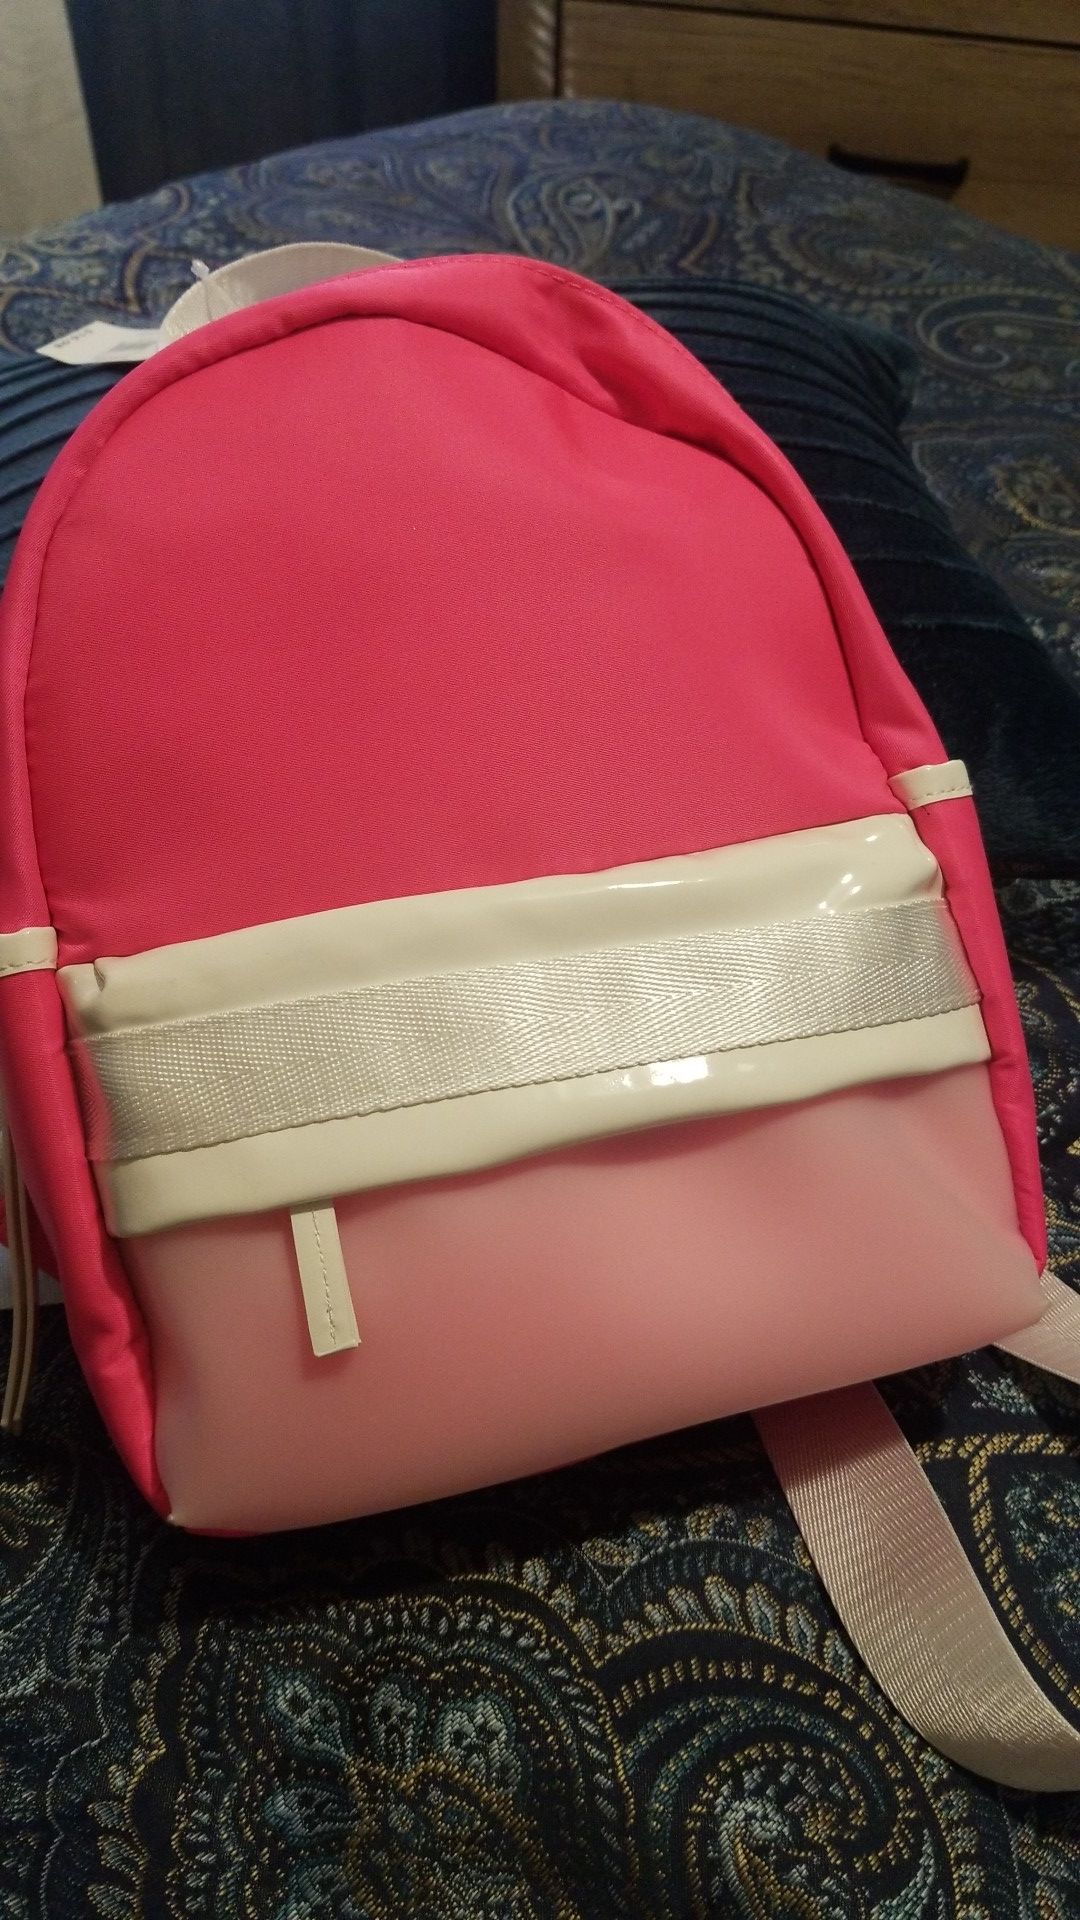 Brand new two cute backpacks yellow and pink